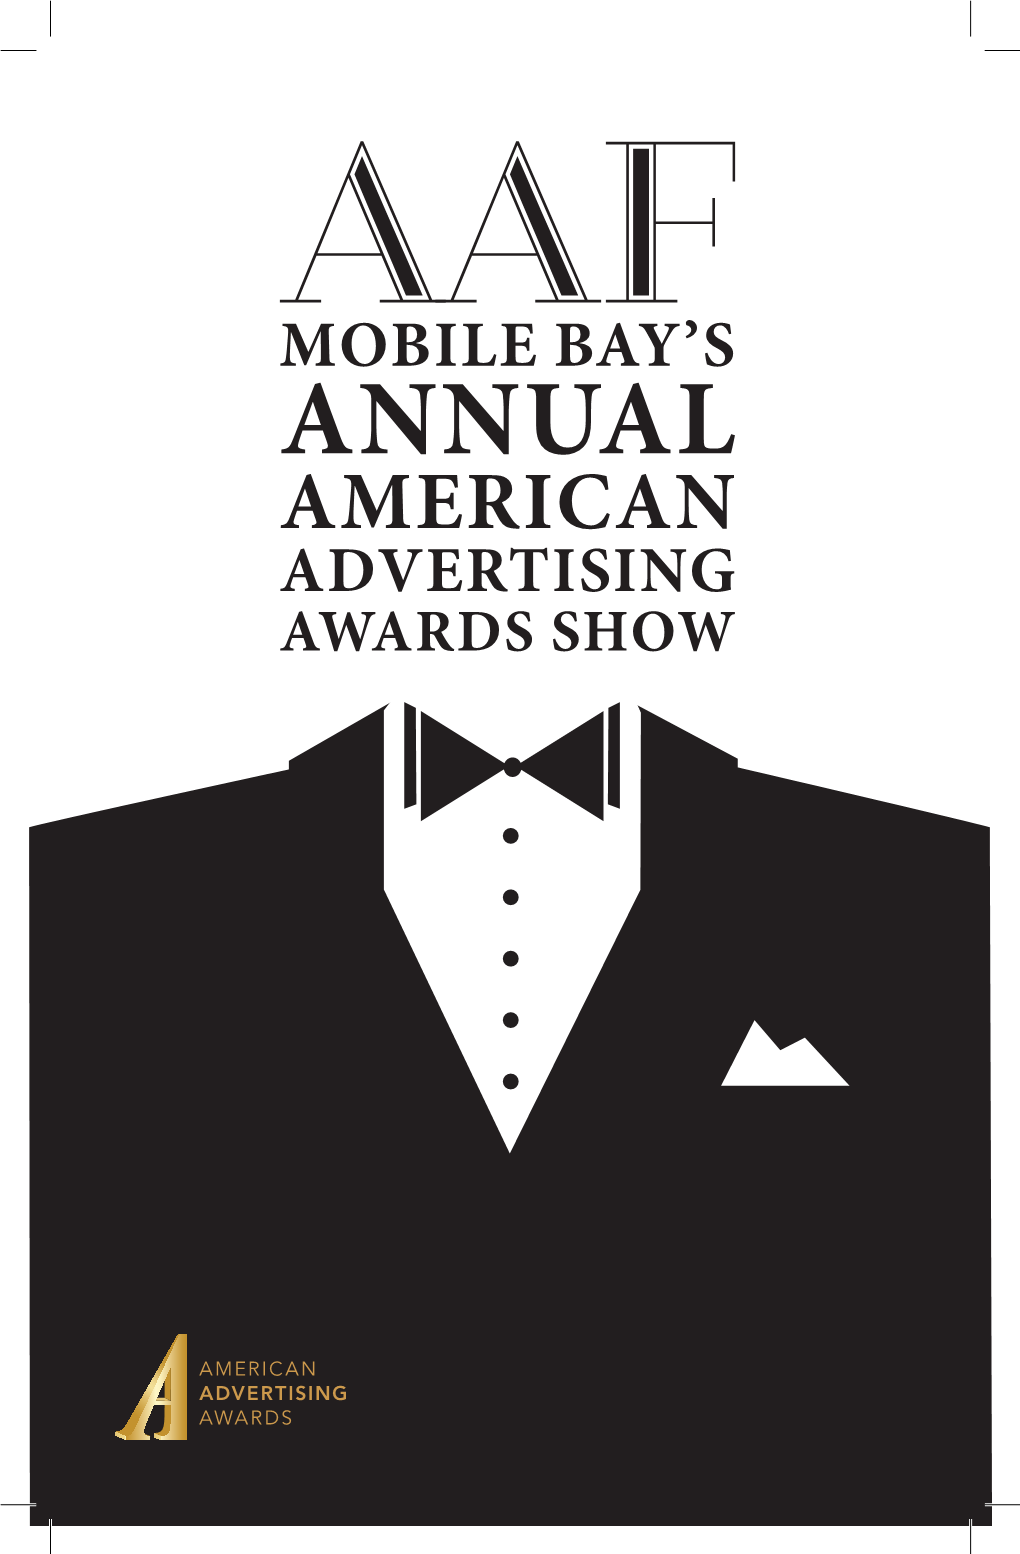 Annual American Advertising Awards Show Mobile Bay’S Annual American Advertising Awards Show